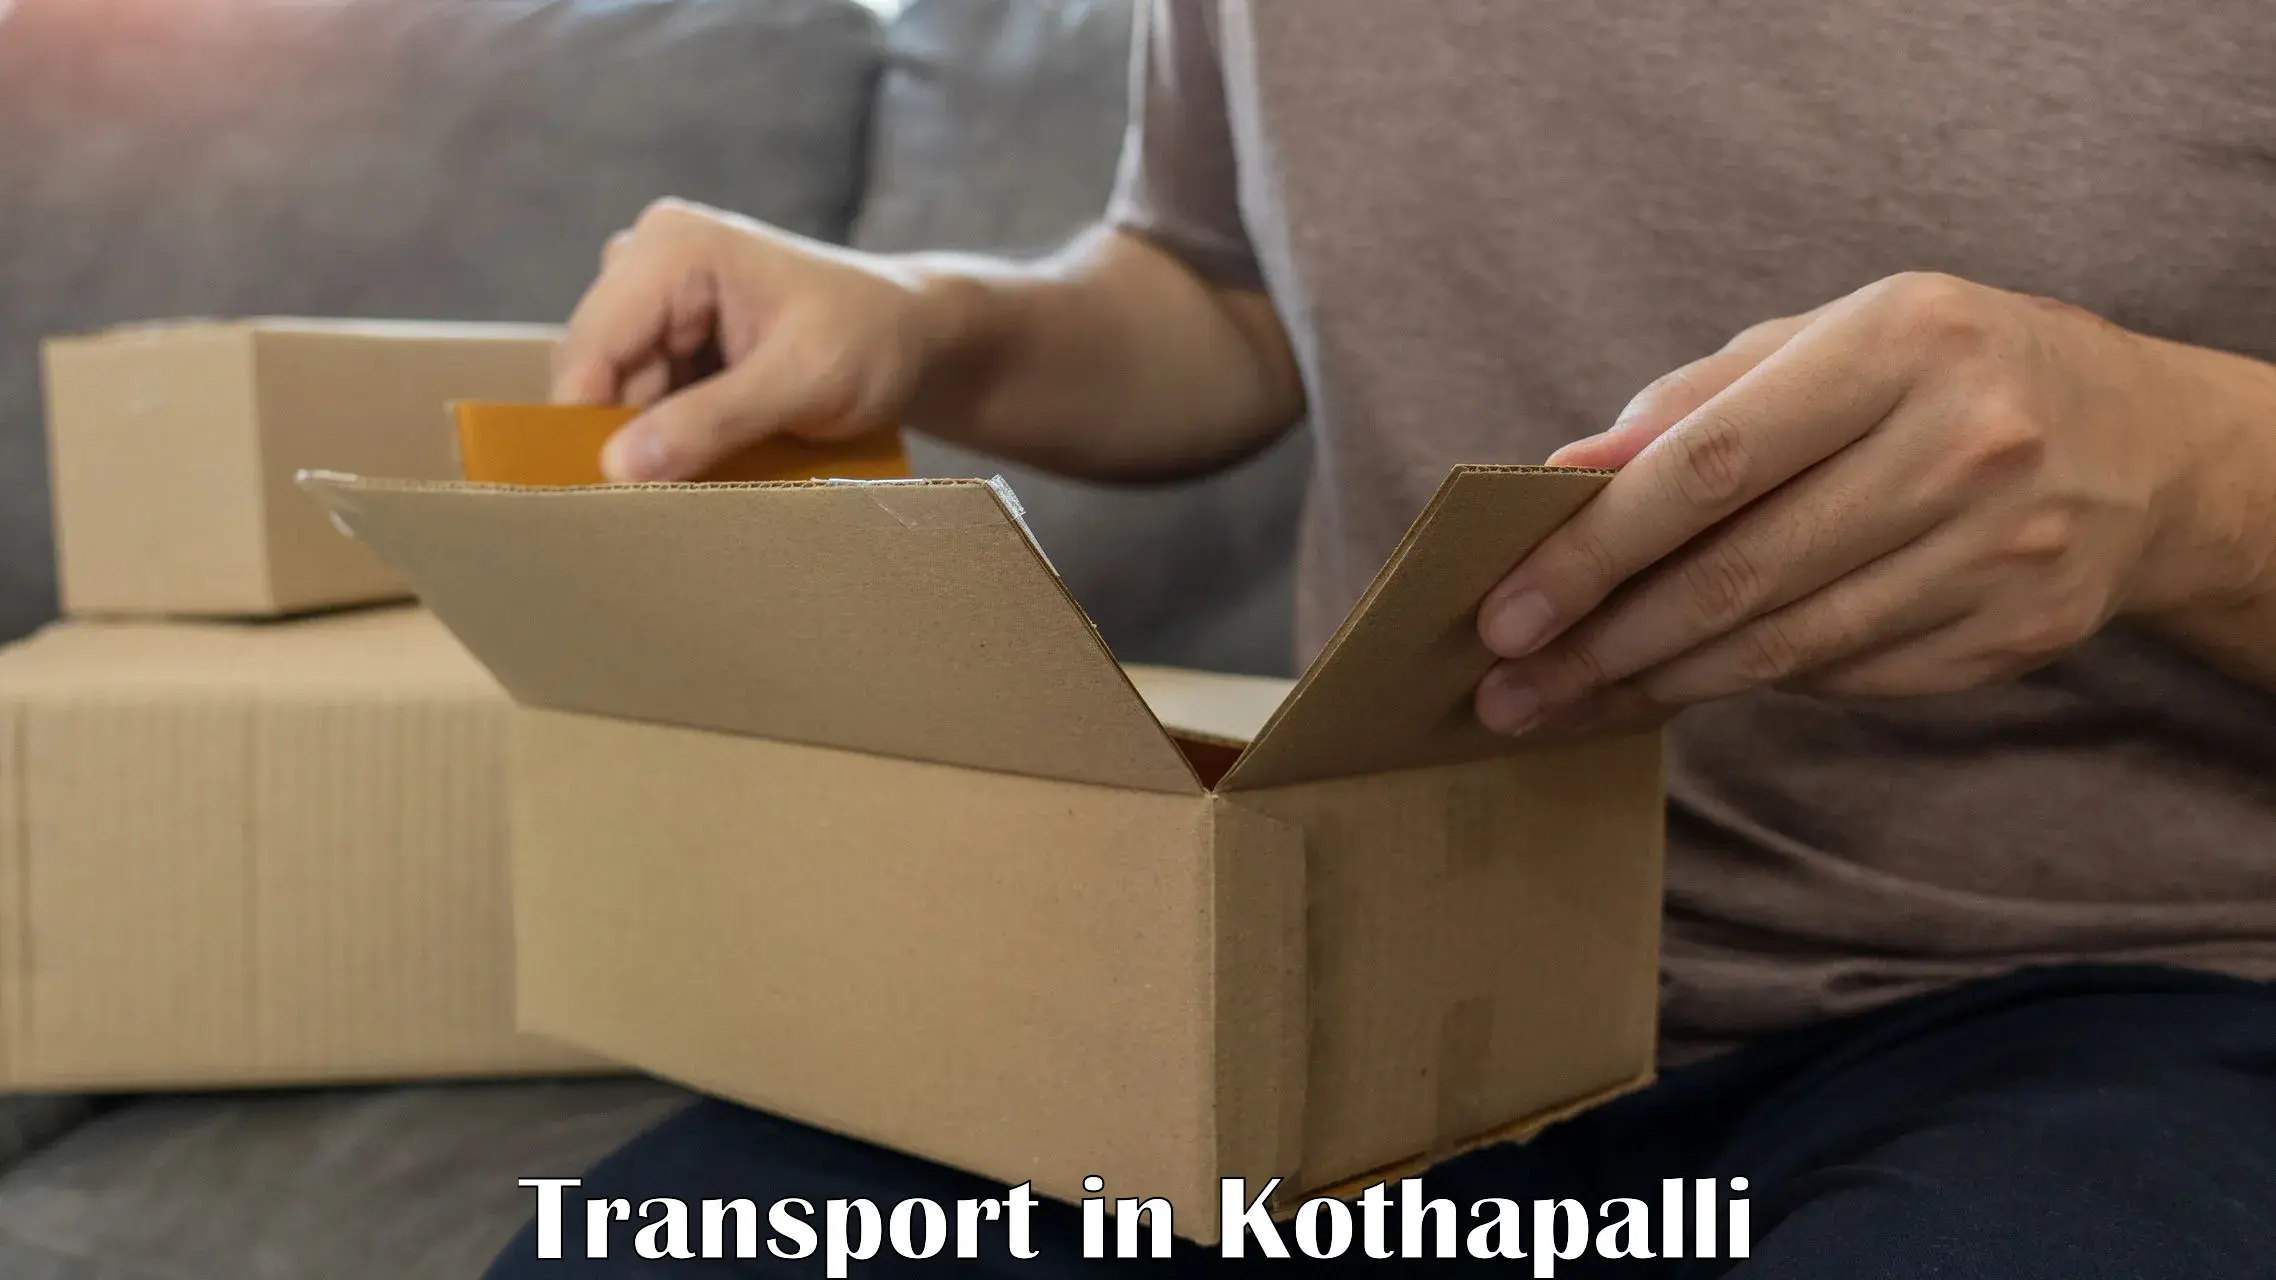 Luggage transport services in Kothapalli